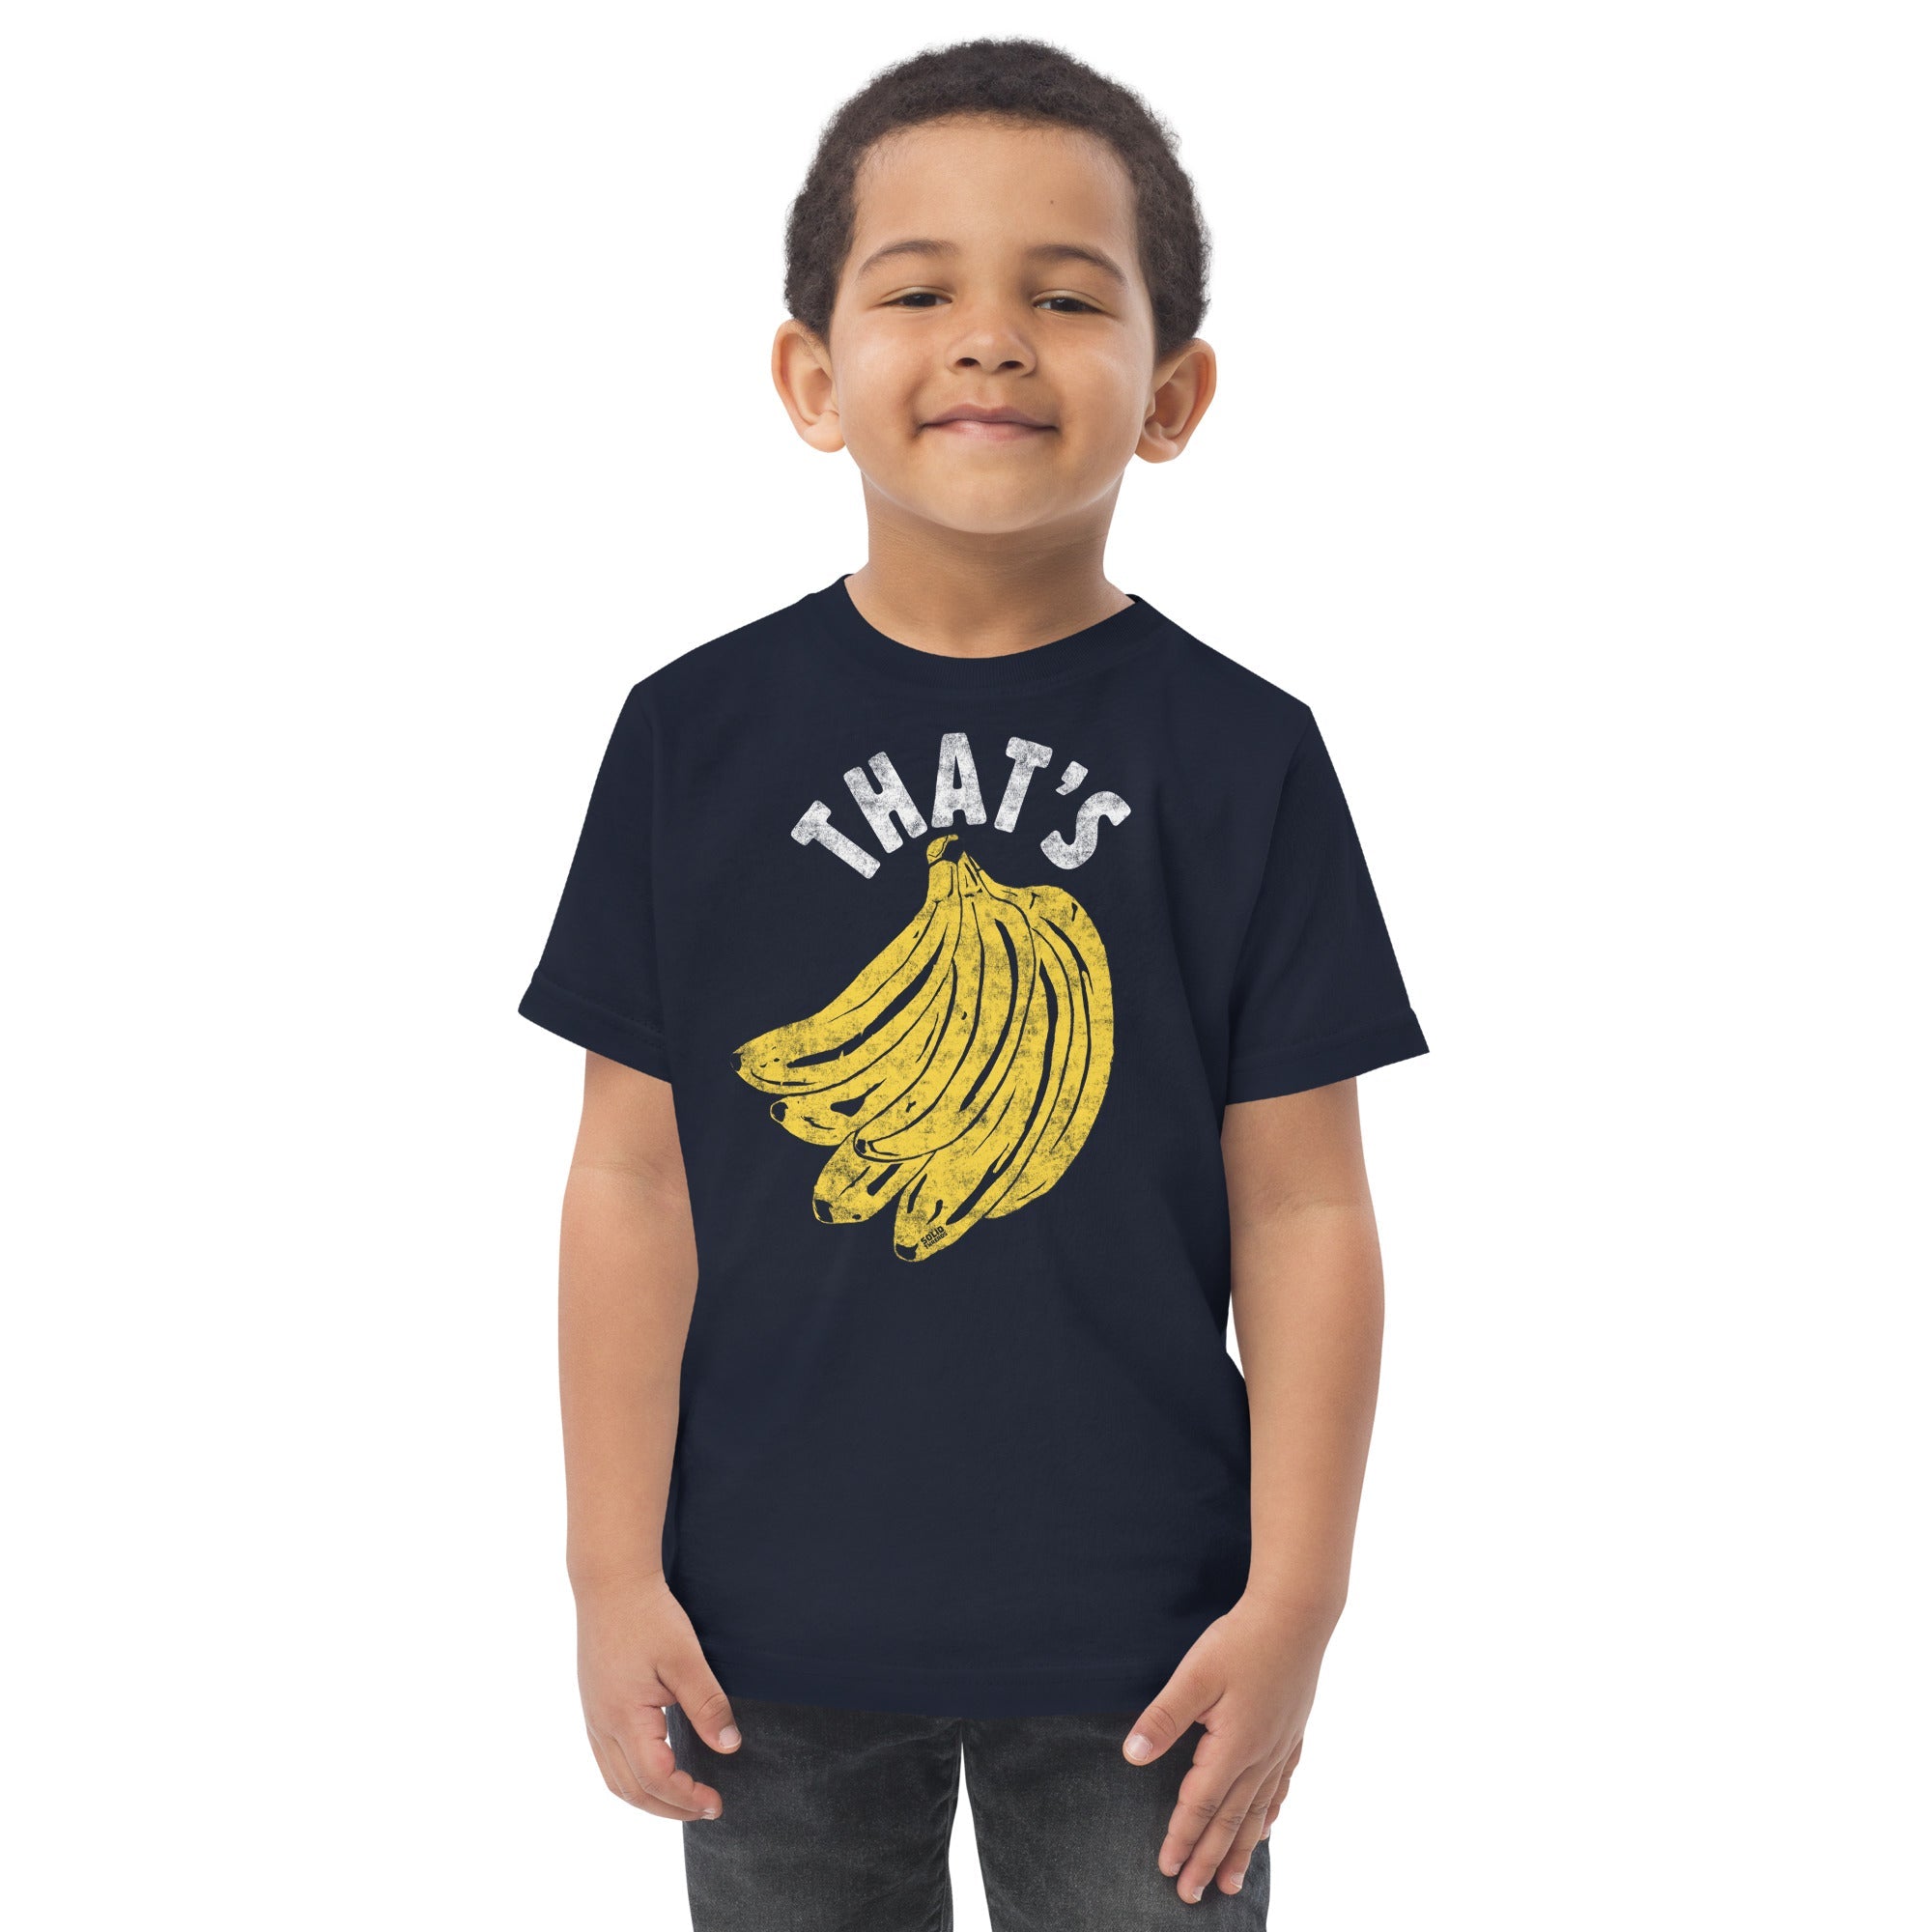 Toddler's That's Bananas Retro Vegan Extra Soft T-Shirt | Funny Fruit Tee On Model | Solid Threads